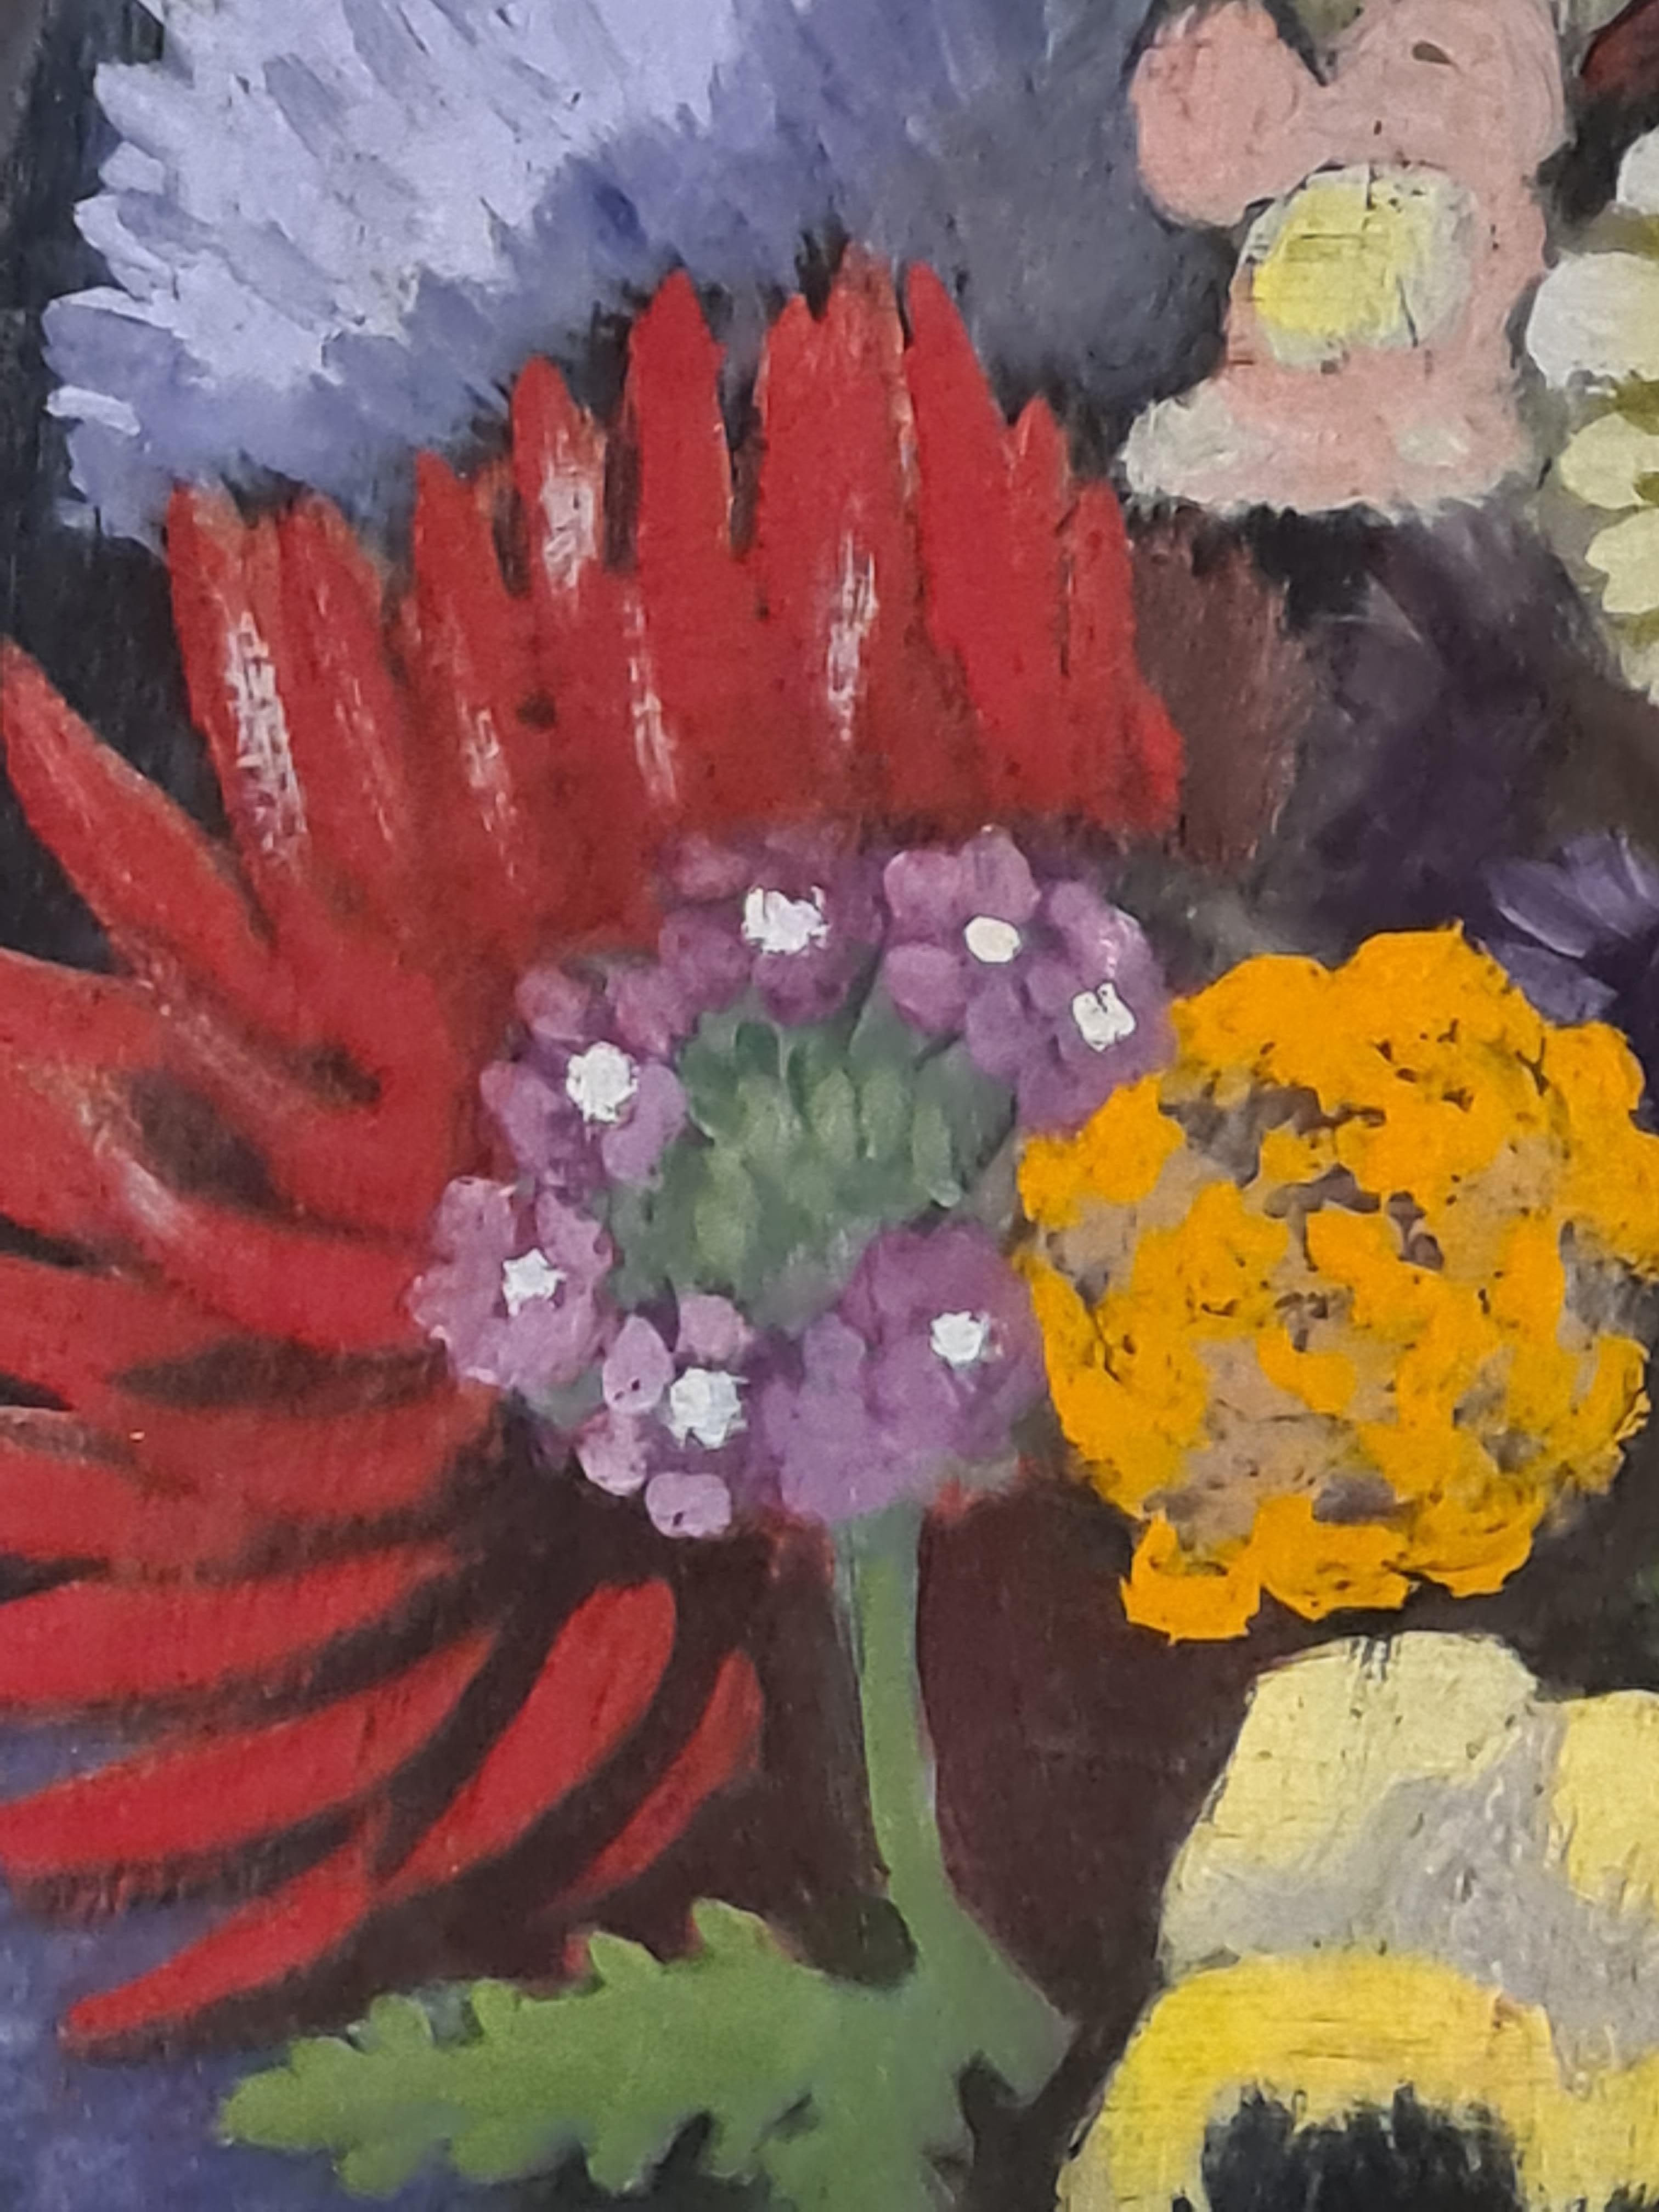 French 'Naive' mid 20th century oil on board painting of flowers in a vase by Madeleine Luka. Signed bottom right, presented in period carved wood frame. There is a title written on the backboard (see photo).

A joyful painting full of strong,